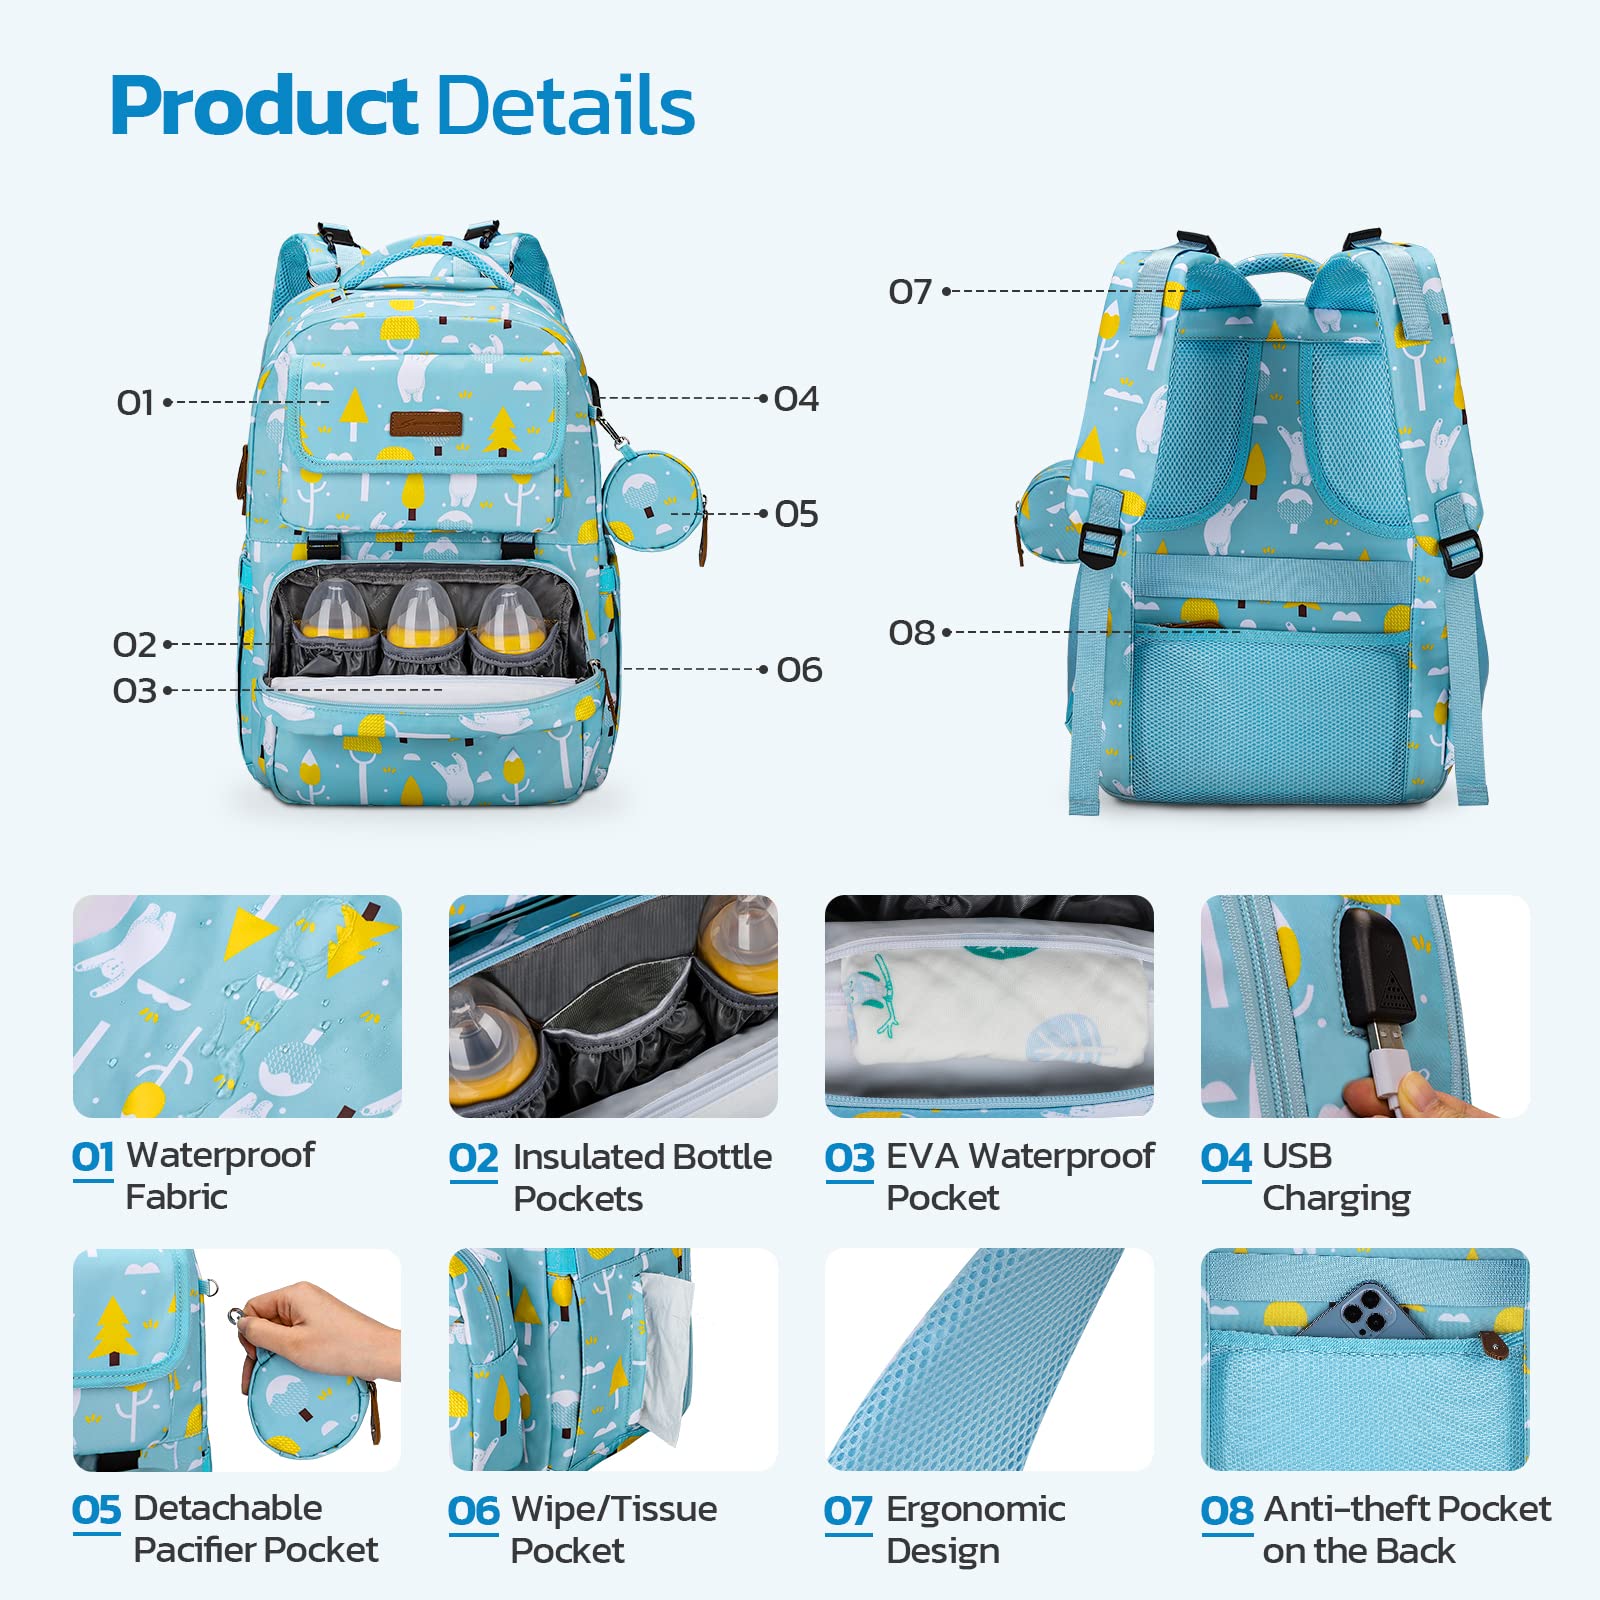 Maelstrom Large Diaper Bag,29L-45L Expandable Diaper Bag Backpack for 2 Kids/Twins Baby Stuff, with Removable Cross Body Bottle Bag for Mom/Dad,Stylish Baby Bag Gift for Boys/Girl-Blue & White Bear